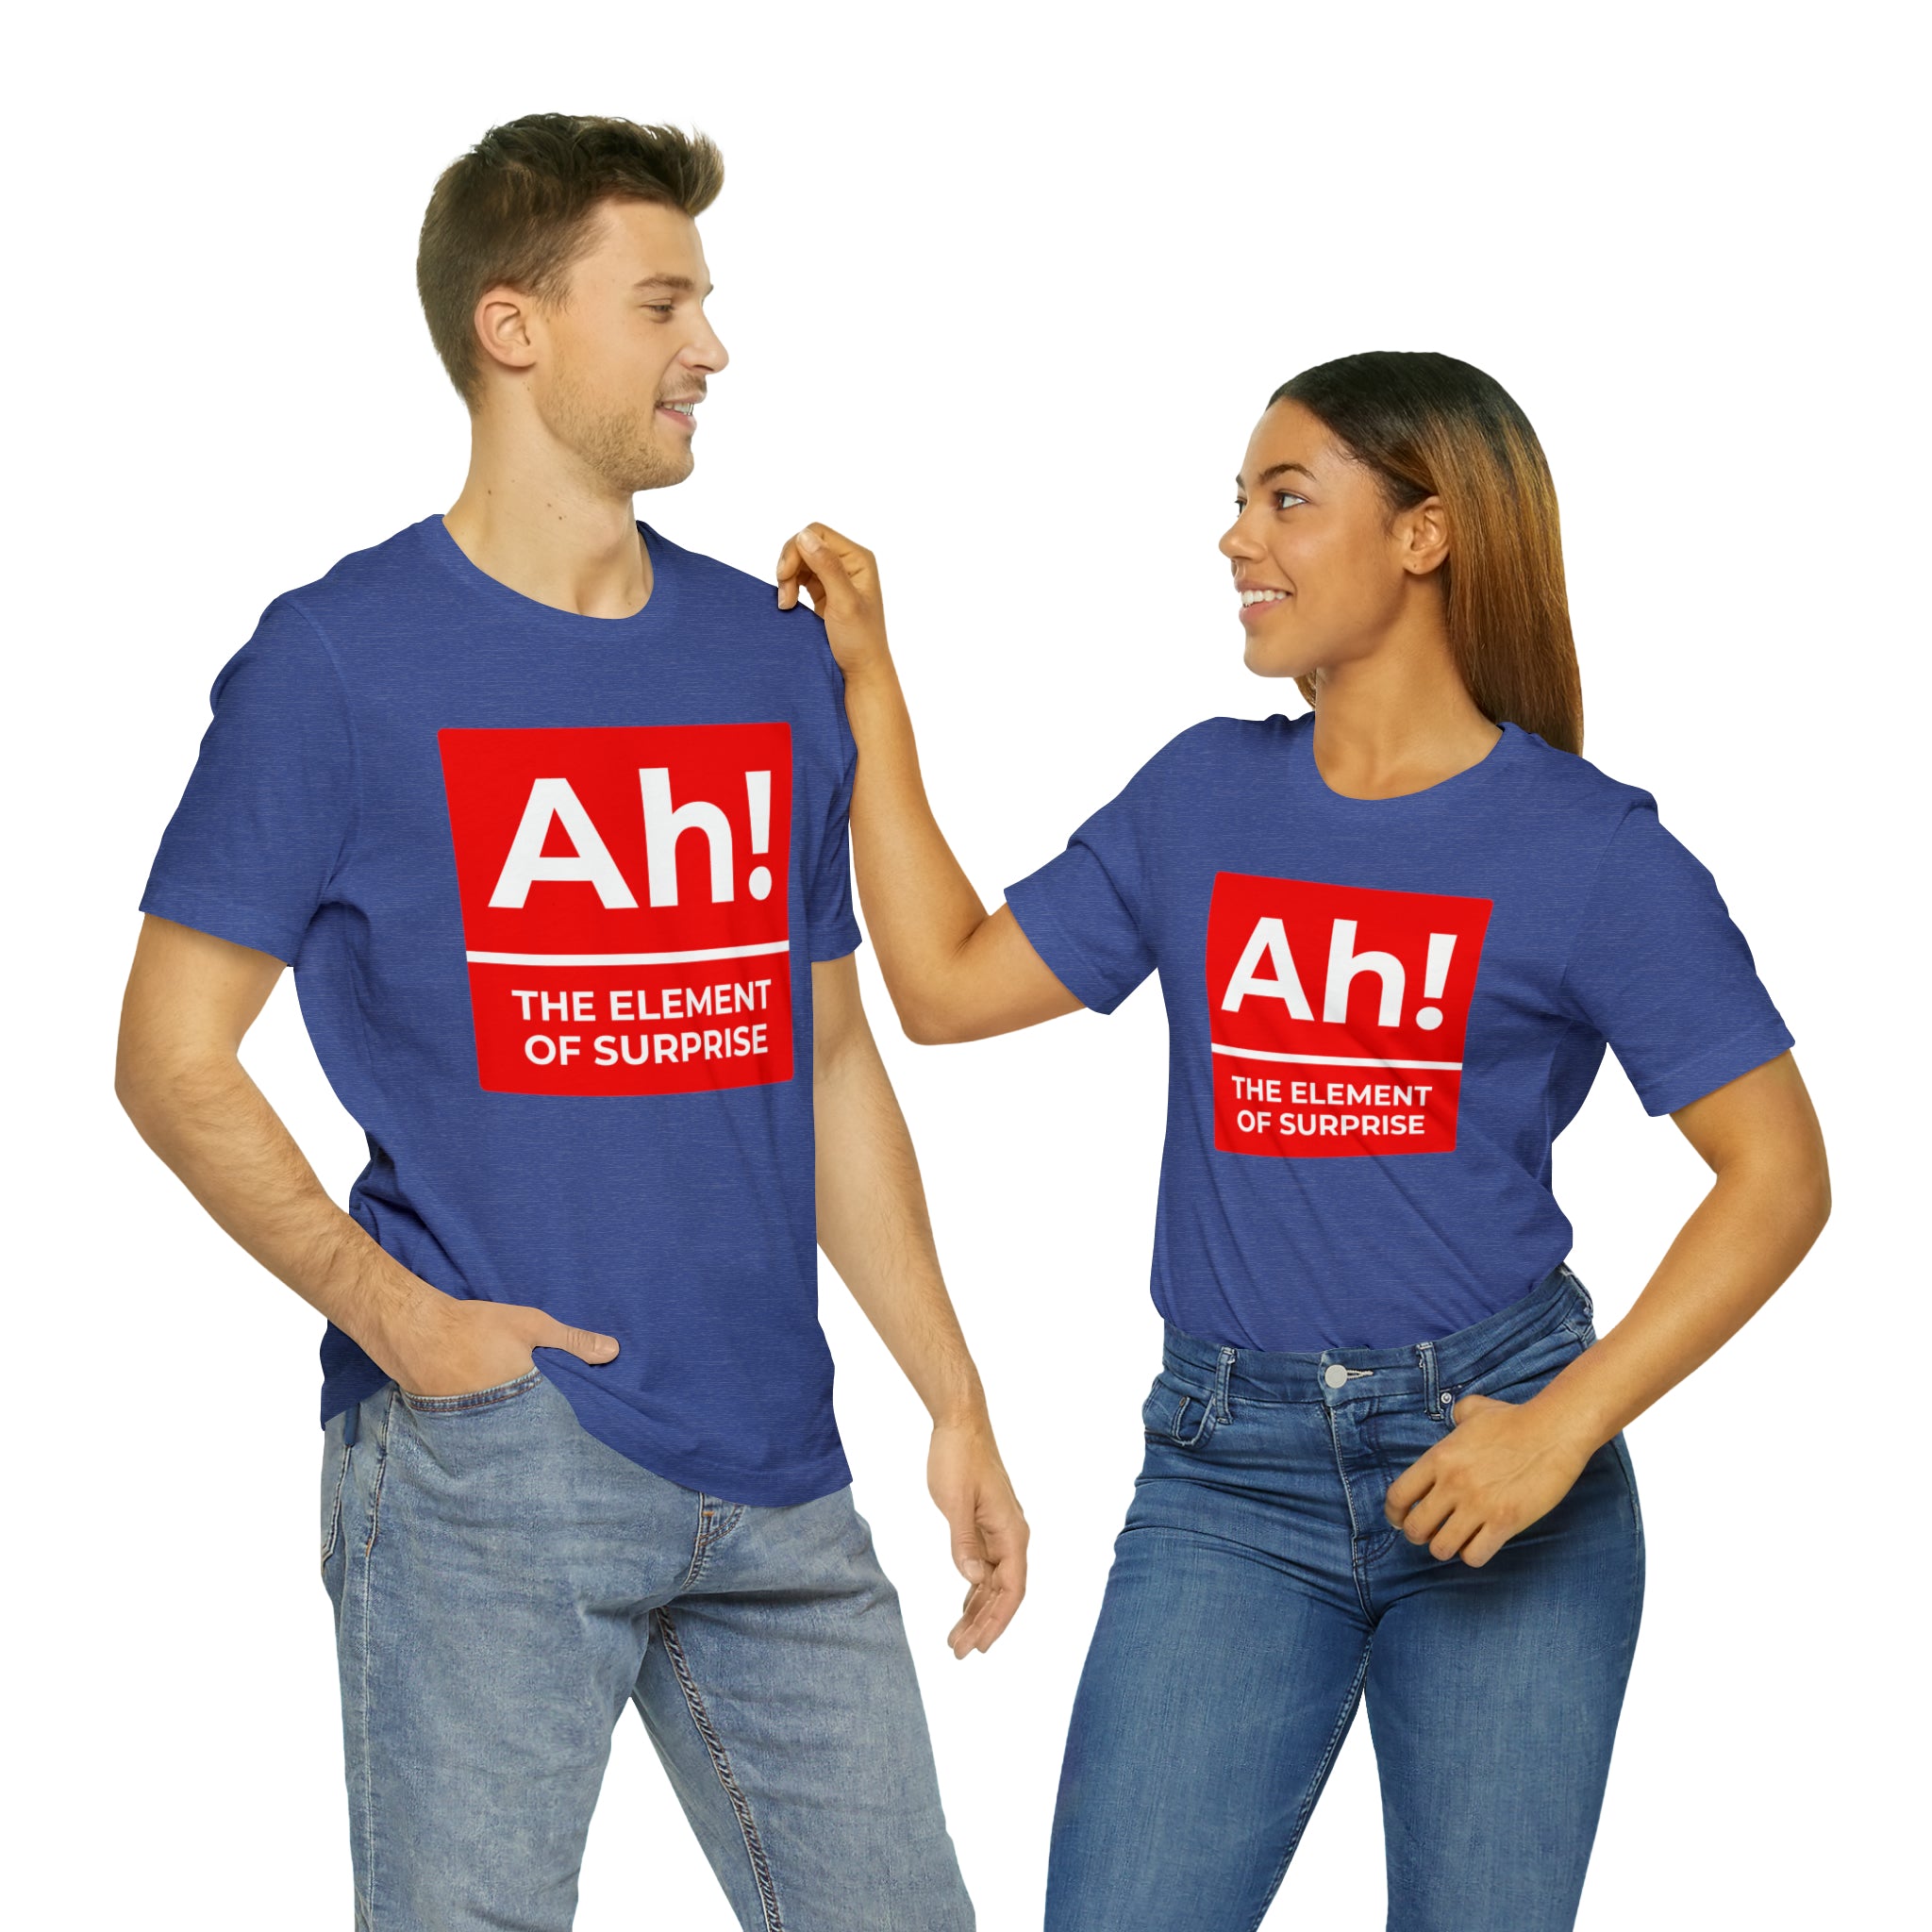 A man and woman standing next to each other wearing a t-shirt that says Ah! the Element of Surprise.